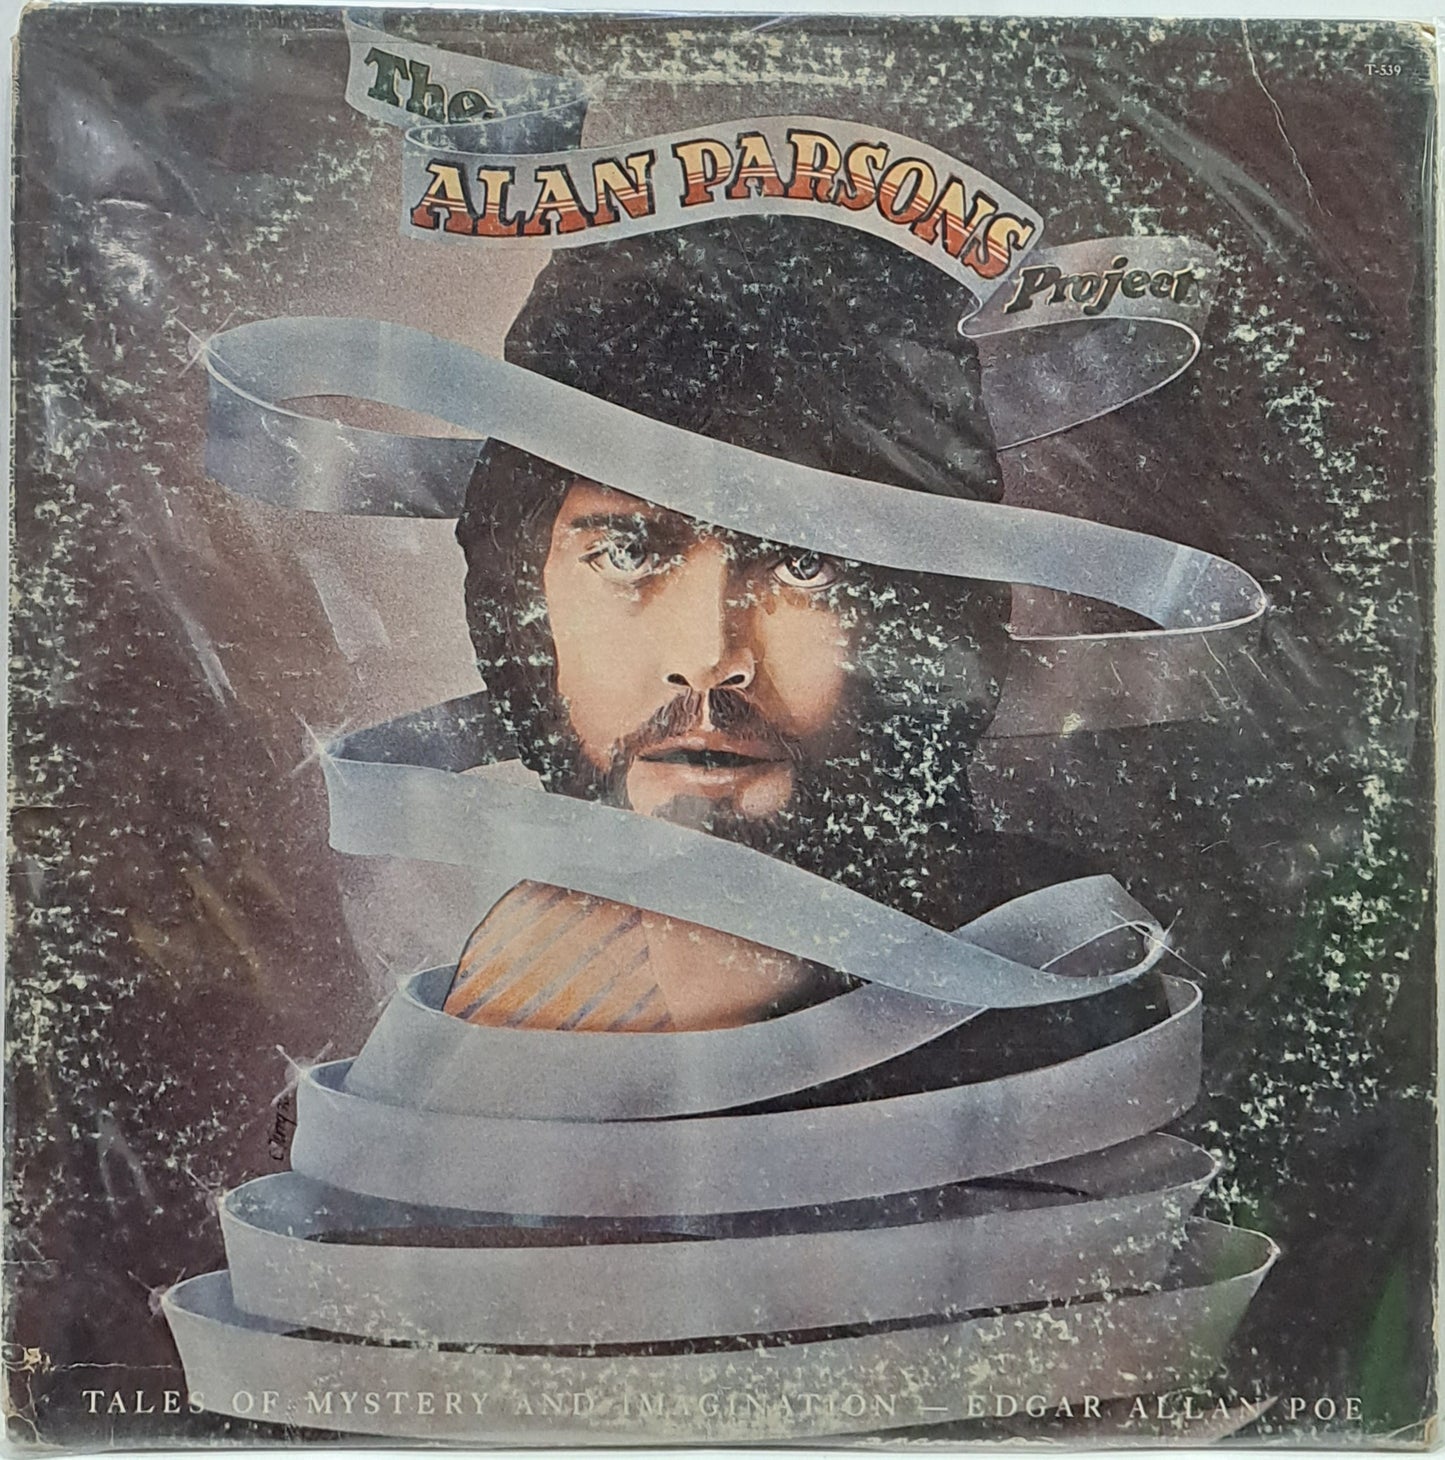 THE ALAN PARSONS PROJECT - TALES OF MYSTERY LP